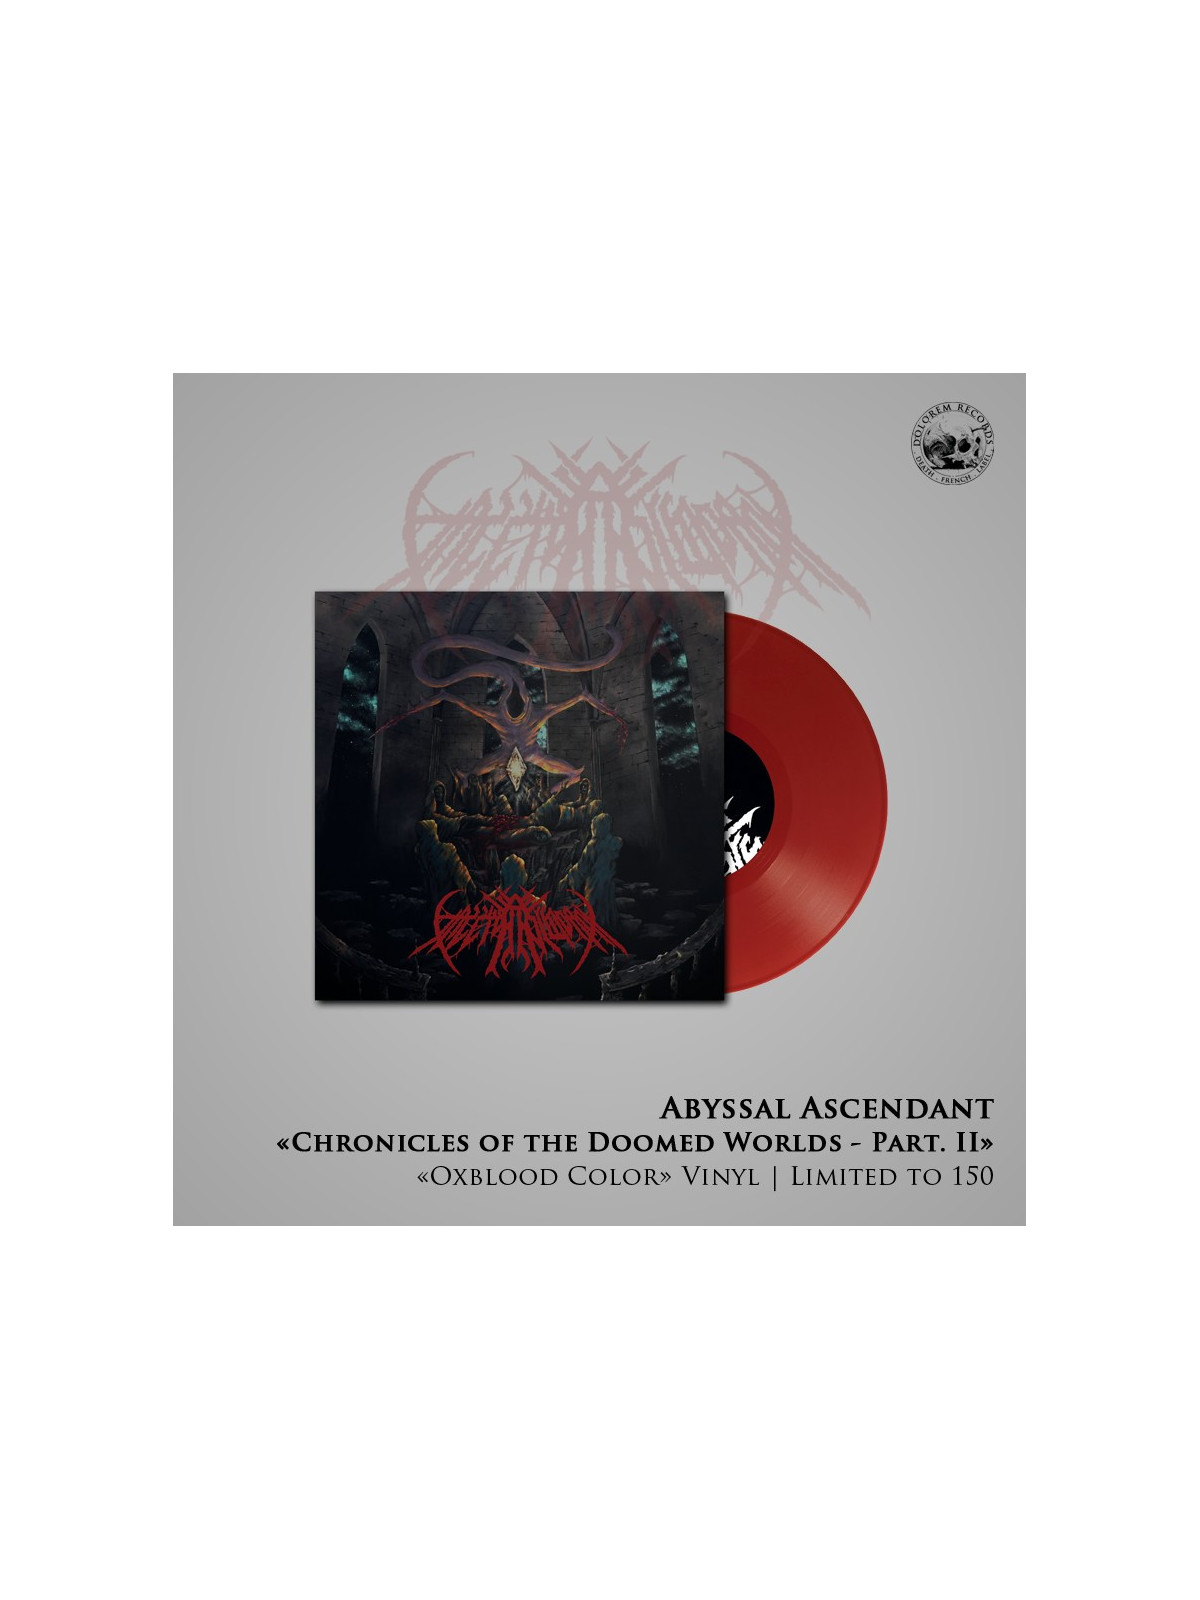 Chronicles of the Doomed Worlds - Part I. Enlightenment from Beyond [Album], Abyssal Ascendant